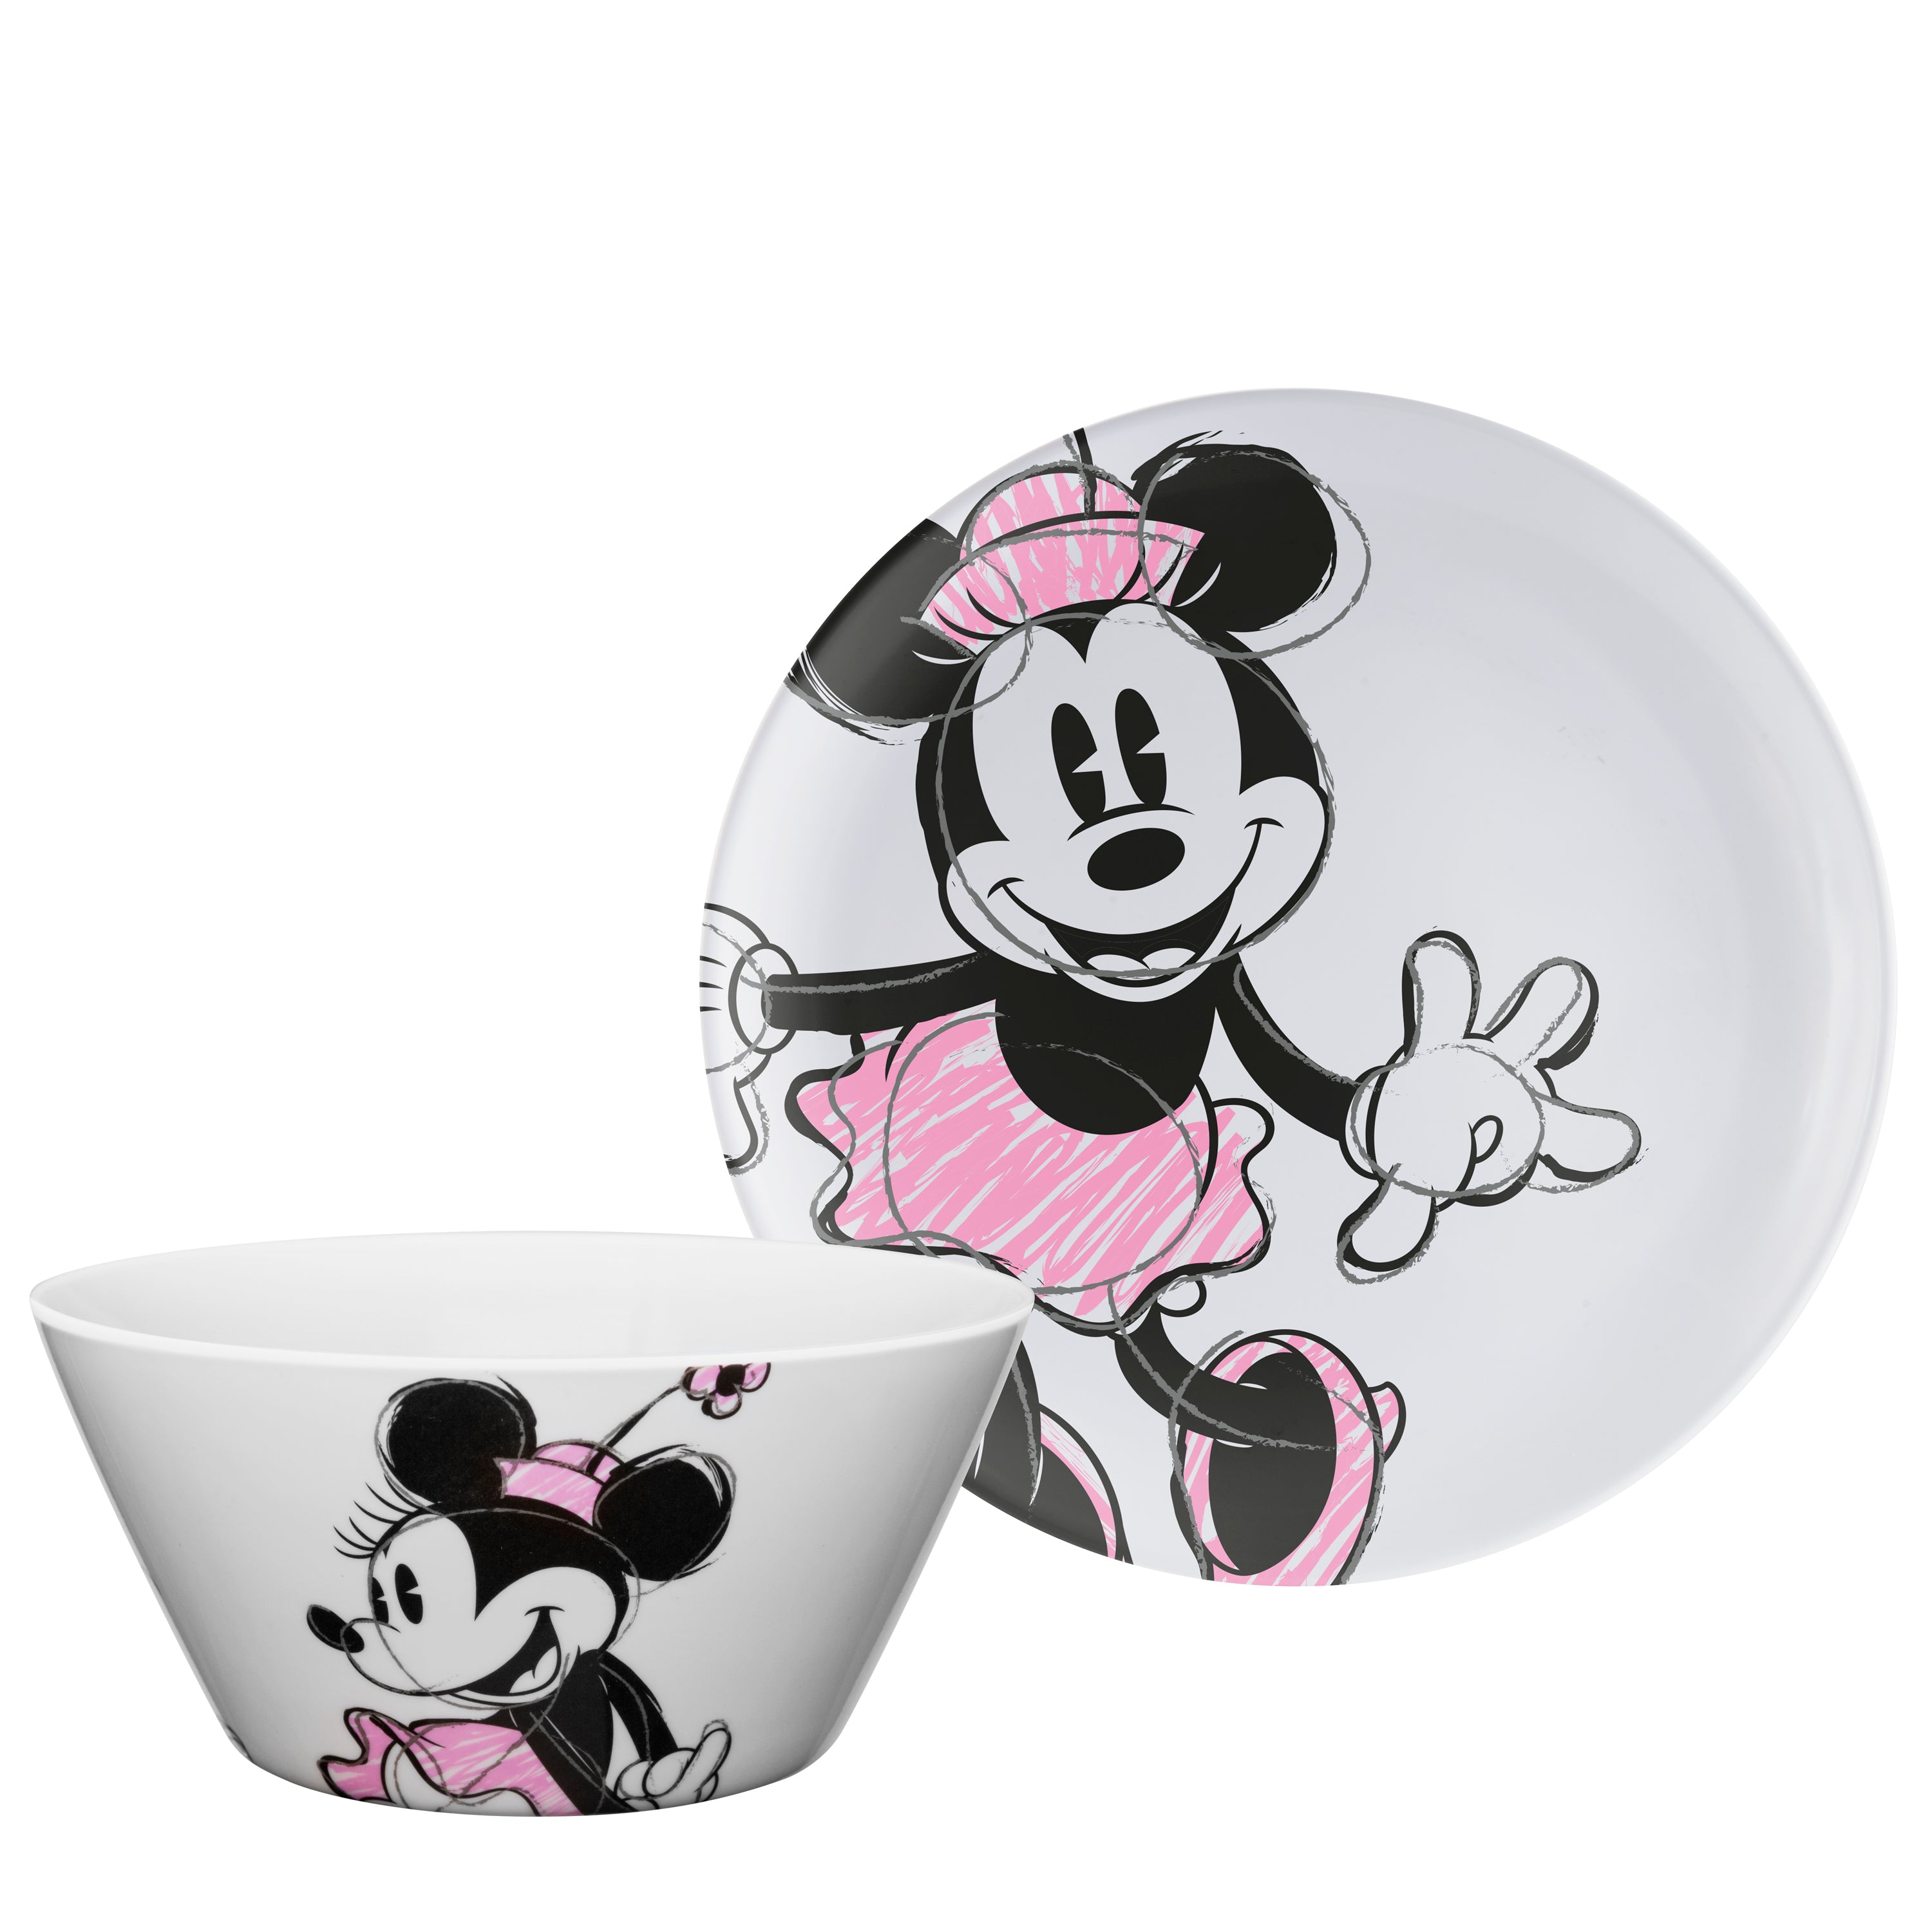 Zak Designs Bluey Kids Dinnerware Set 3 Pieces, Durable and Sustainable  Melamine Bamboo Plate, Bowl, and Tumbler are Perfect For Dinner Time With